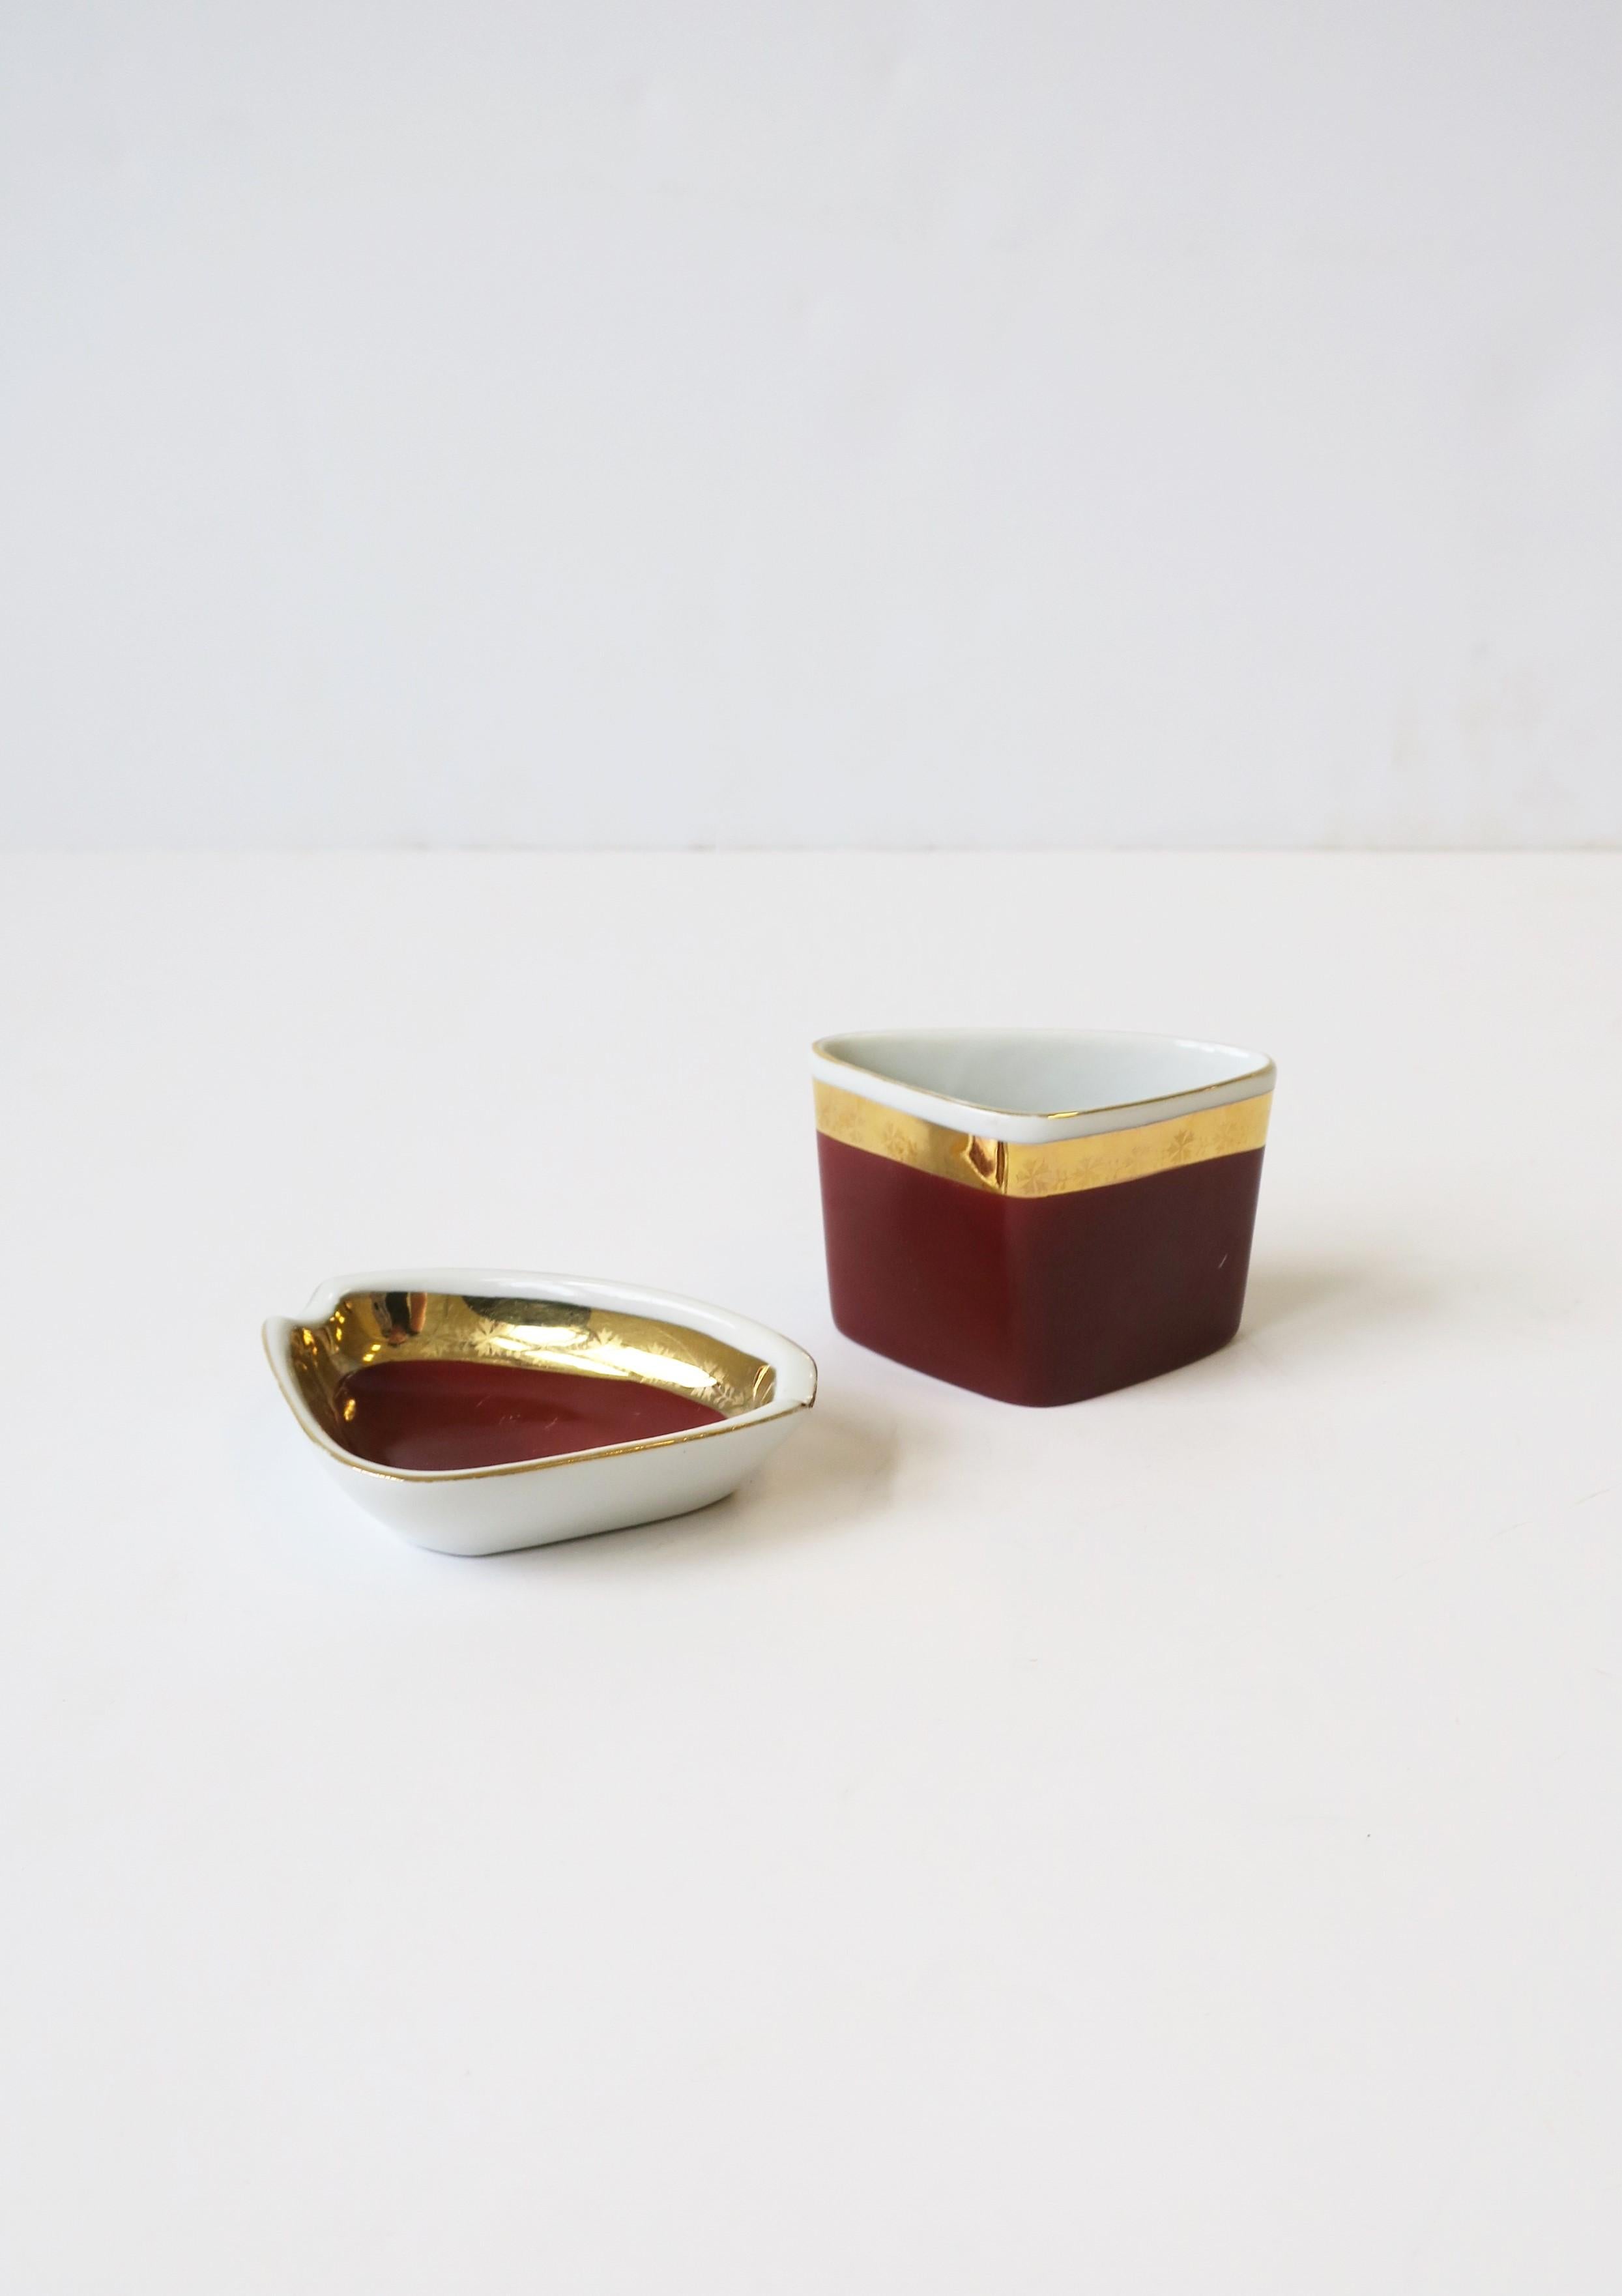 A Hungarian porcelain ashtray and loose cigarette vessel holder set, Mid-Century Modern, circa early to mid-20th century, Hungary by Hollohaza. Set has a triangular shape with gold and red burgundy hues. A great set for a home bar, library, etc.